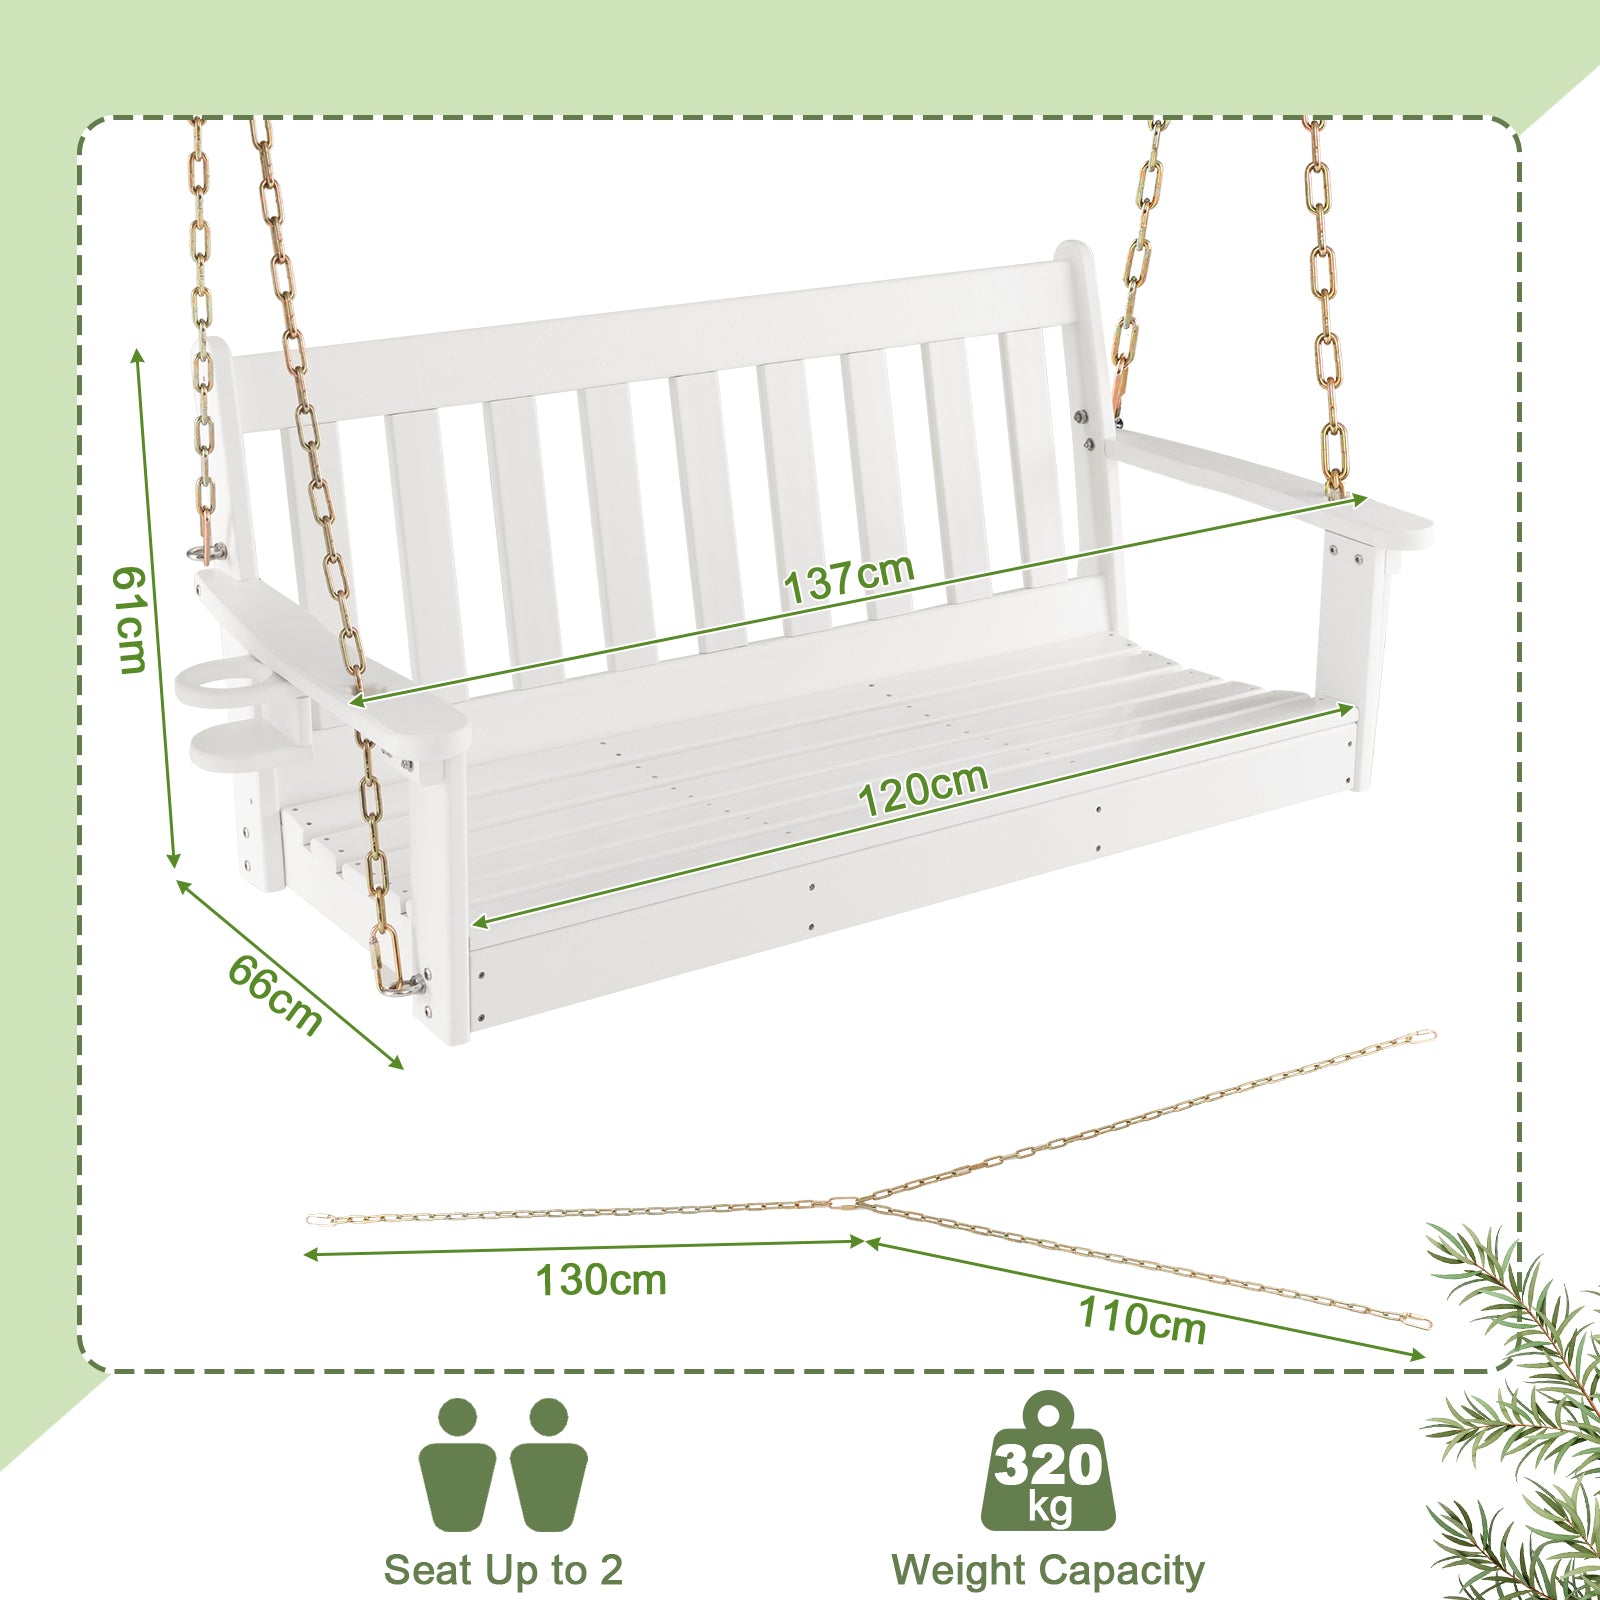 HDPE Porch Swing with Hidden Cup Holder and Adjustable Secure Chains-White